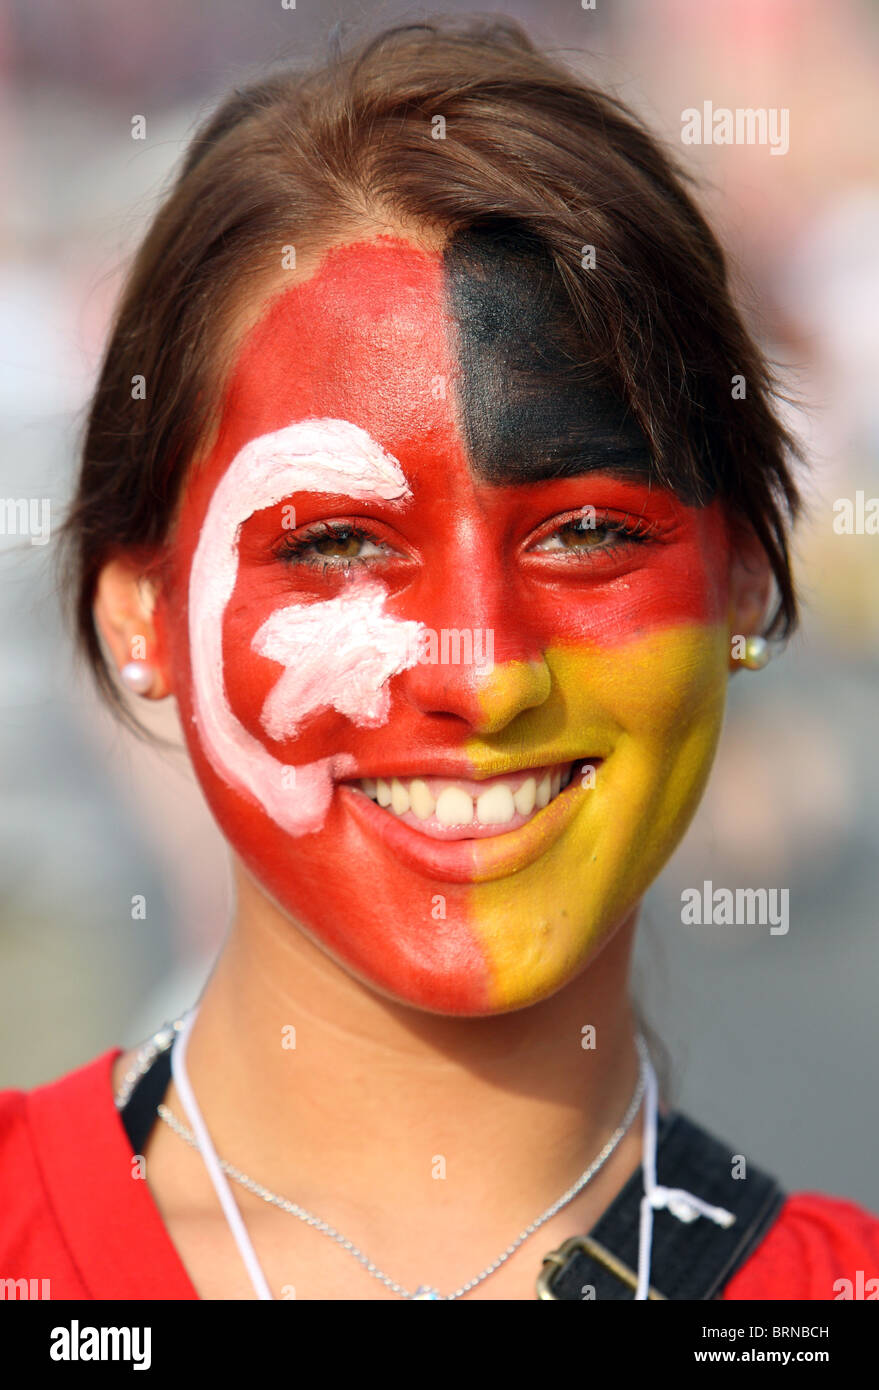 A football fan at the semi-final match between Germany and Turkey, Berlin, Germany Stock Photo